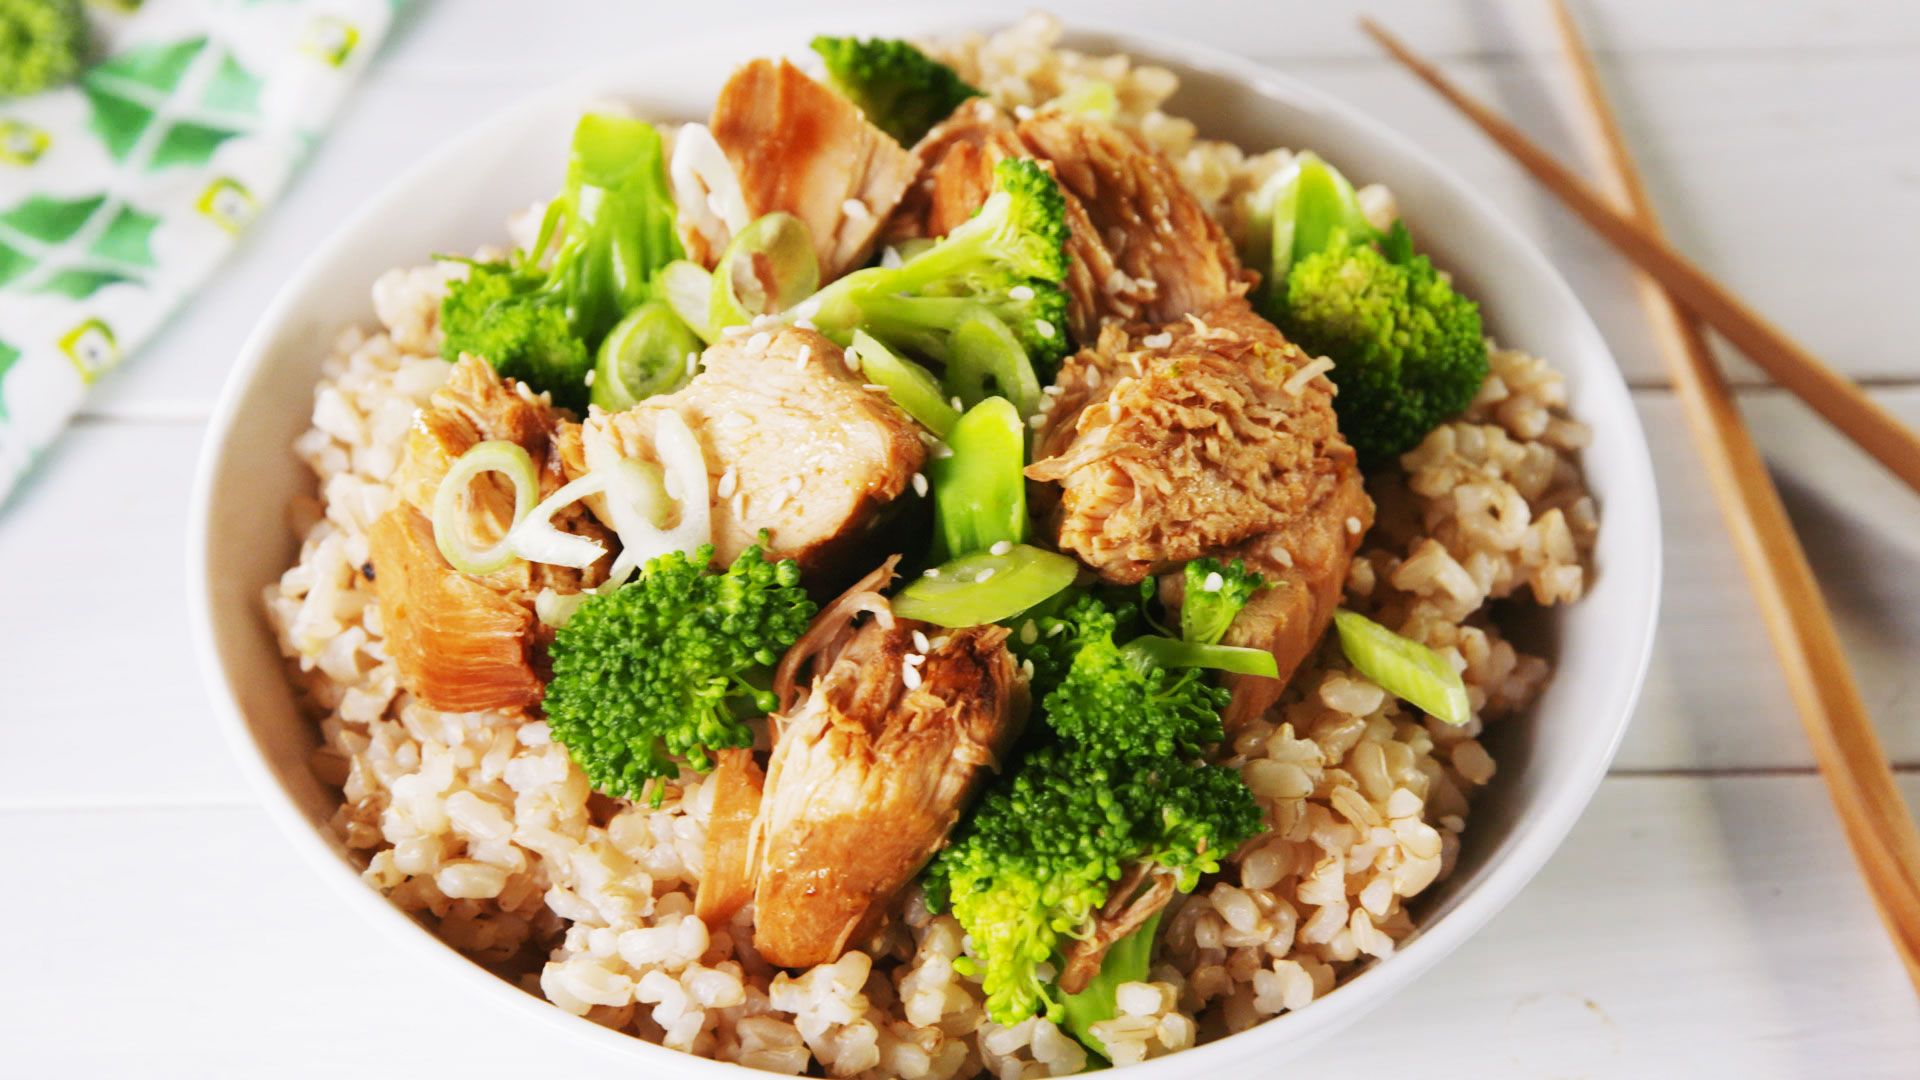 Best Slow Cooker Chicken And Broccoli Recipe How To Make Slow Cooker Chicken And Broccoli